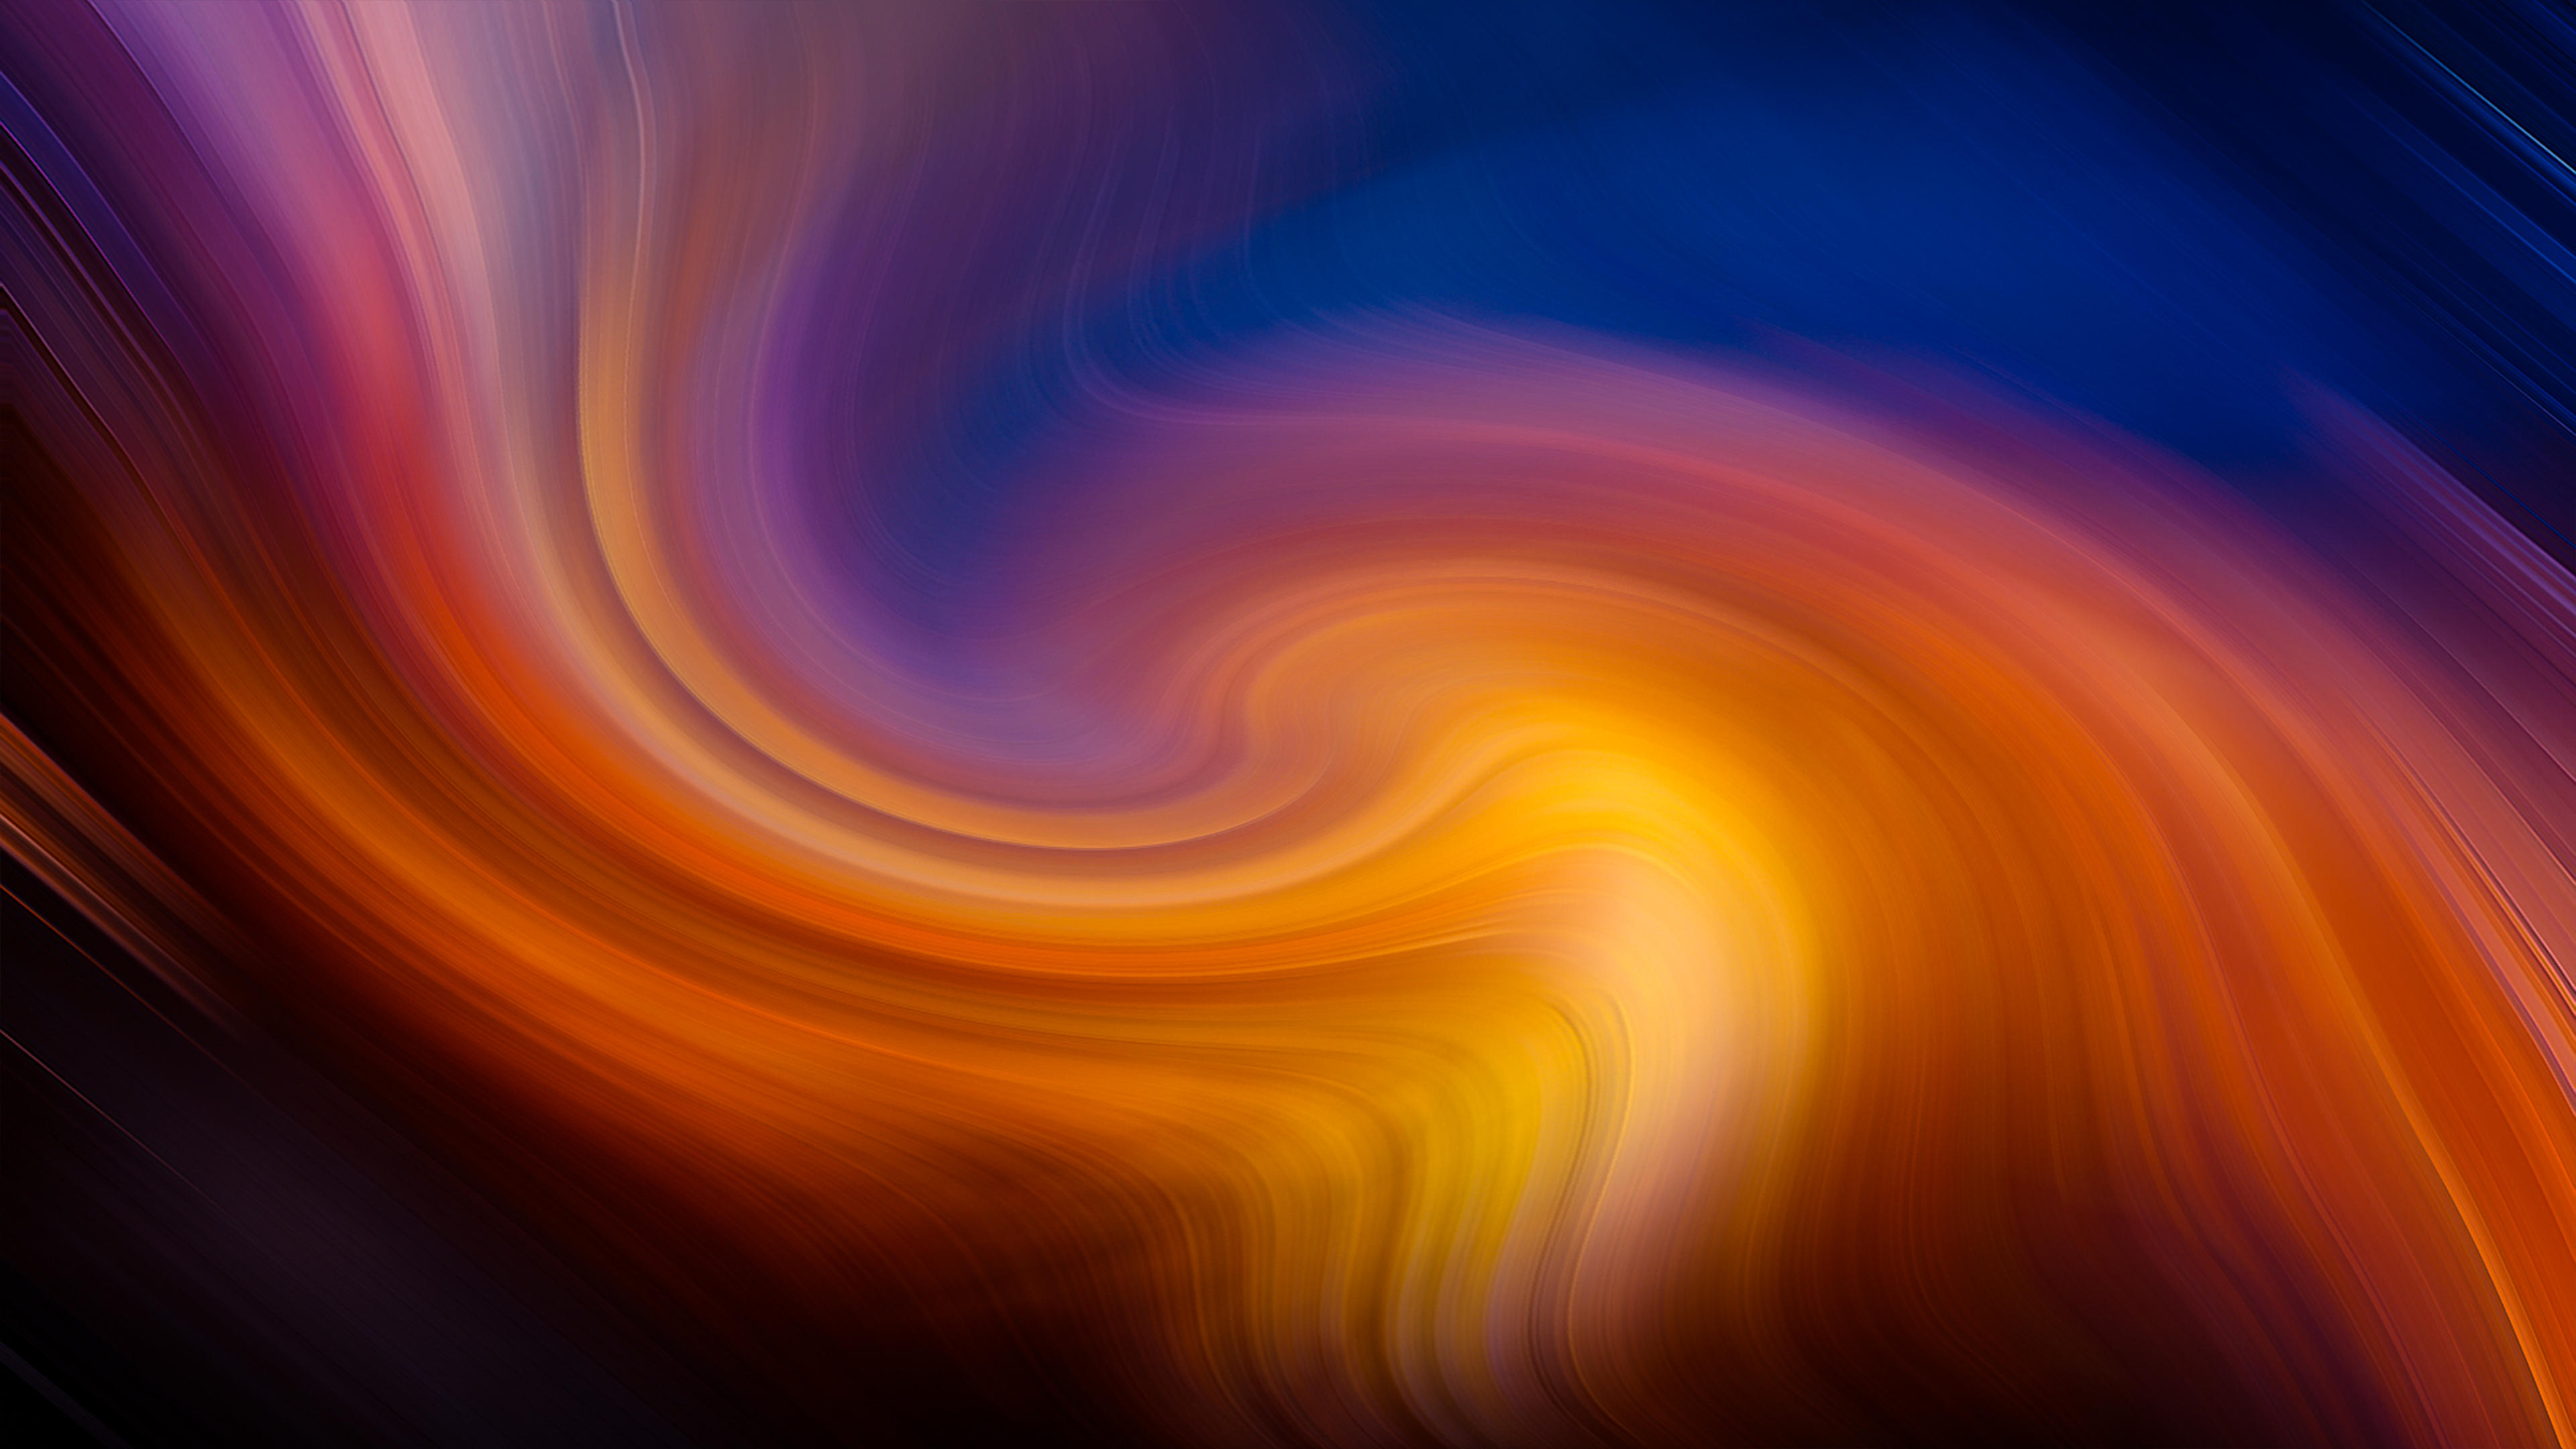 Abstract 3D Colourful 4K HD Wallpapers | HD Wallpapers | ID #31684